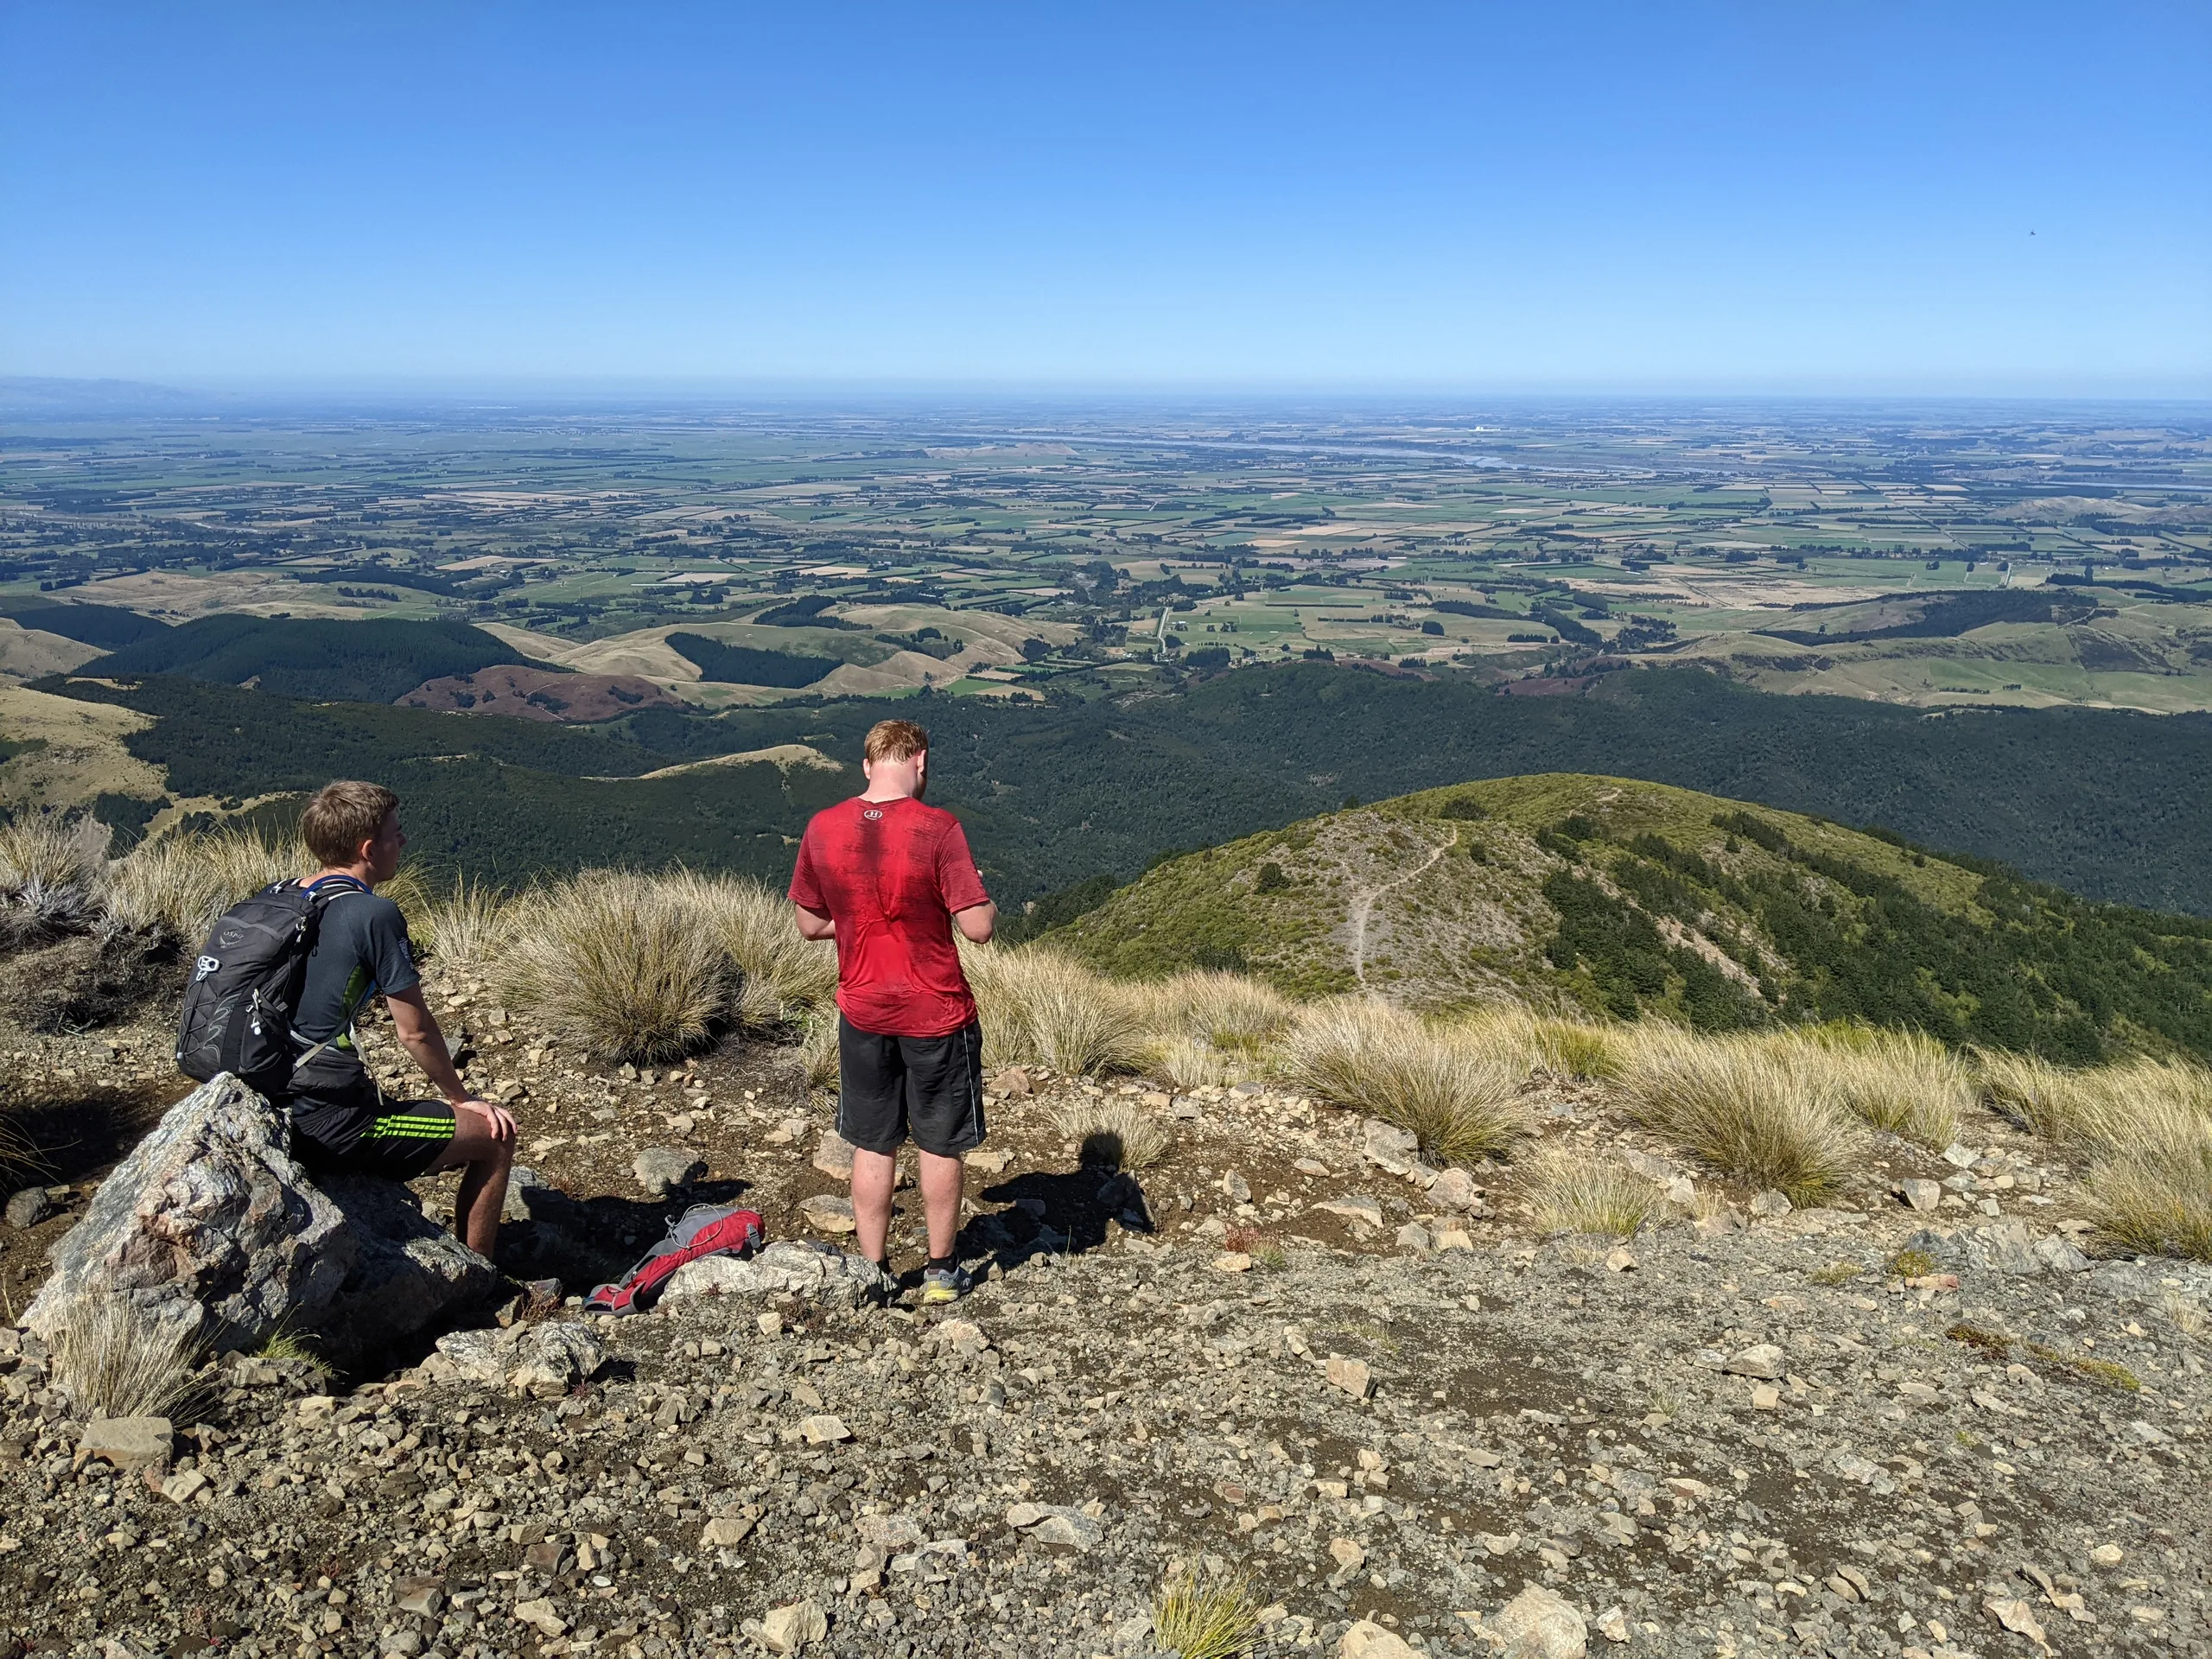 Arriving at the summit of Mt Oxford. The Canterbury Plains are laid out in front of the hill making for an expansive view across to Banks Peninsula and the coast.